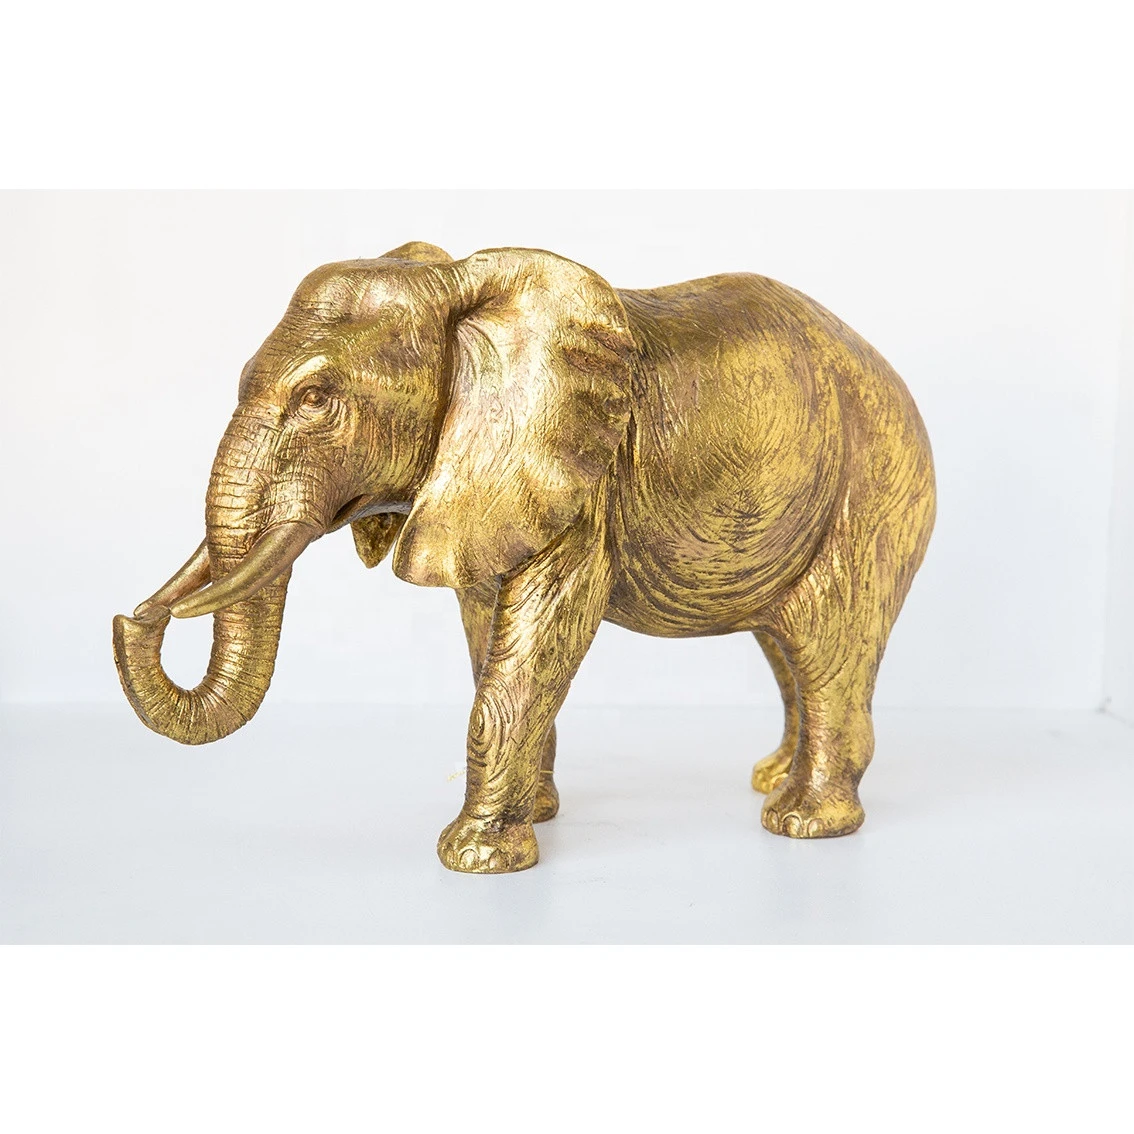 Beautiful High Quality Golden Animal Figurines Statue Home Decoration in Resin Elephant